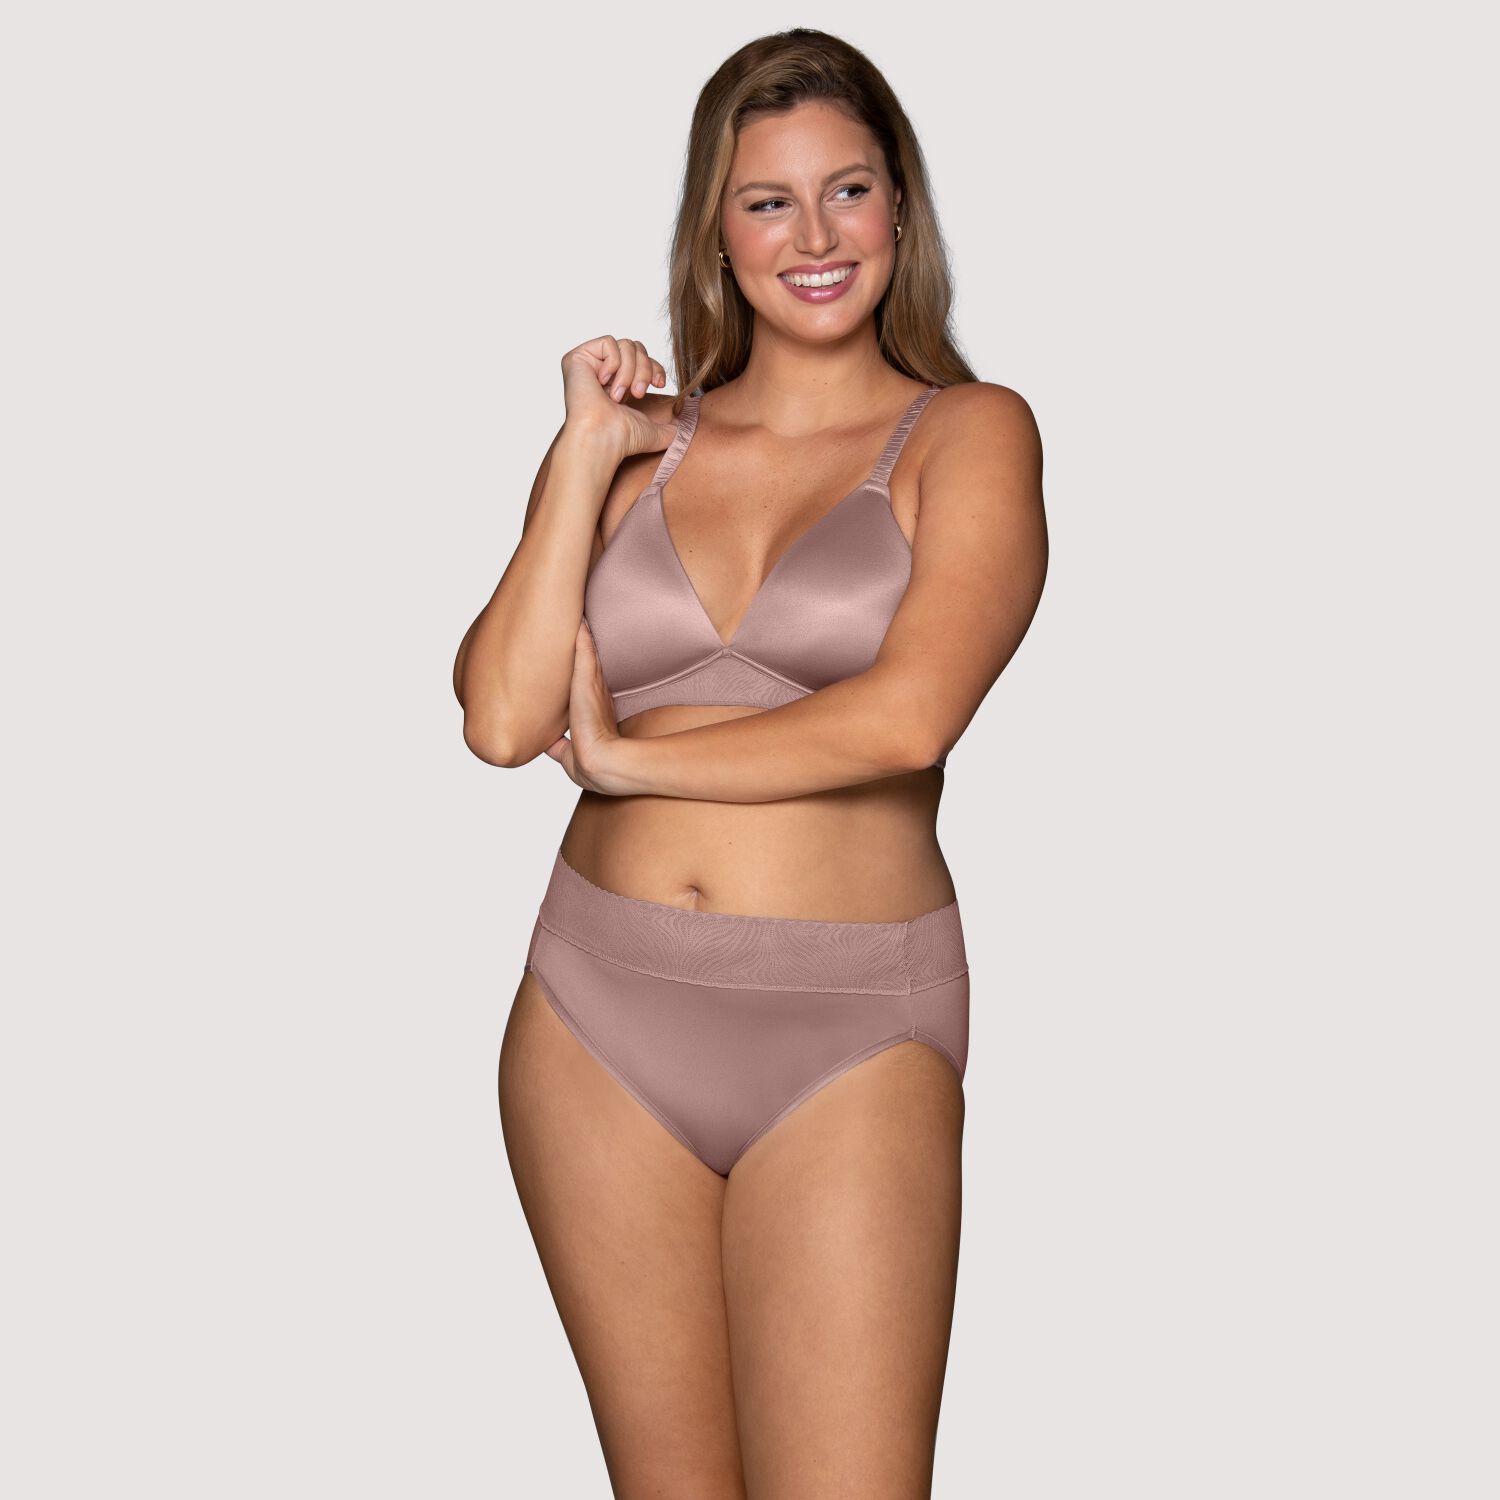 PSA] Missguided has launched their first lingerie collection! Sizes 30AA-34C,  prices $34 and under! : r/ABraThatFits